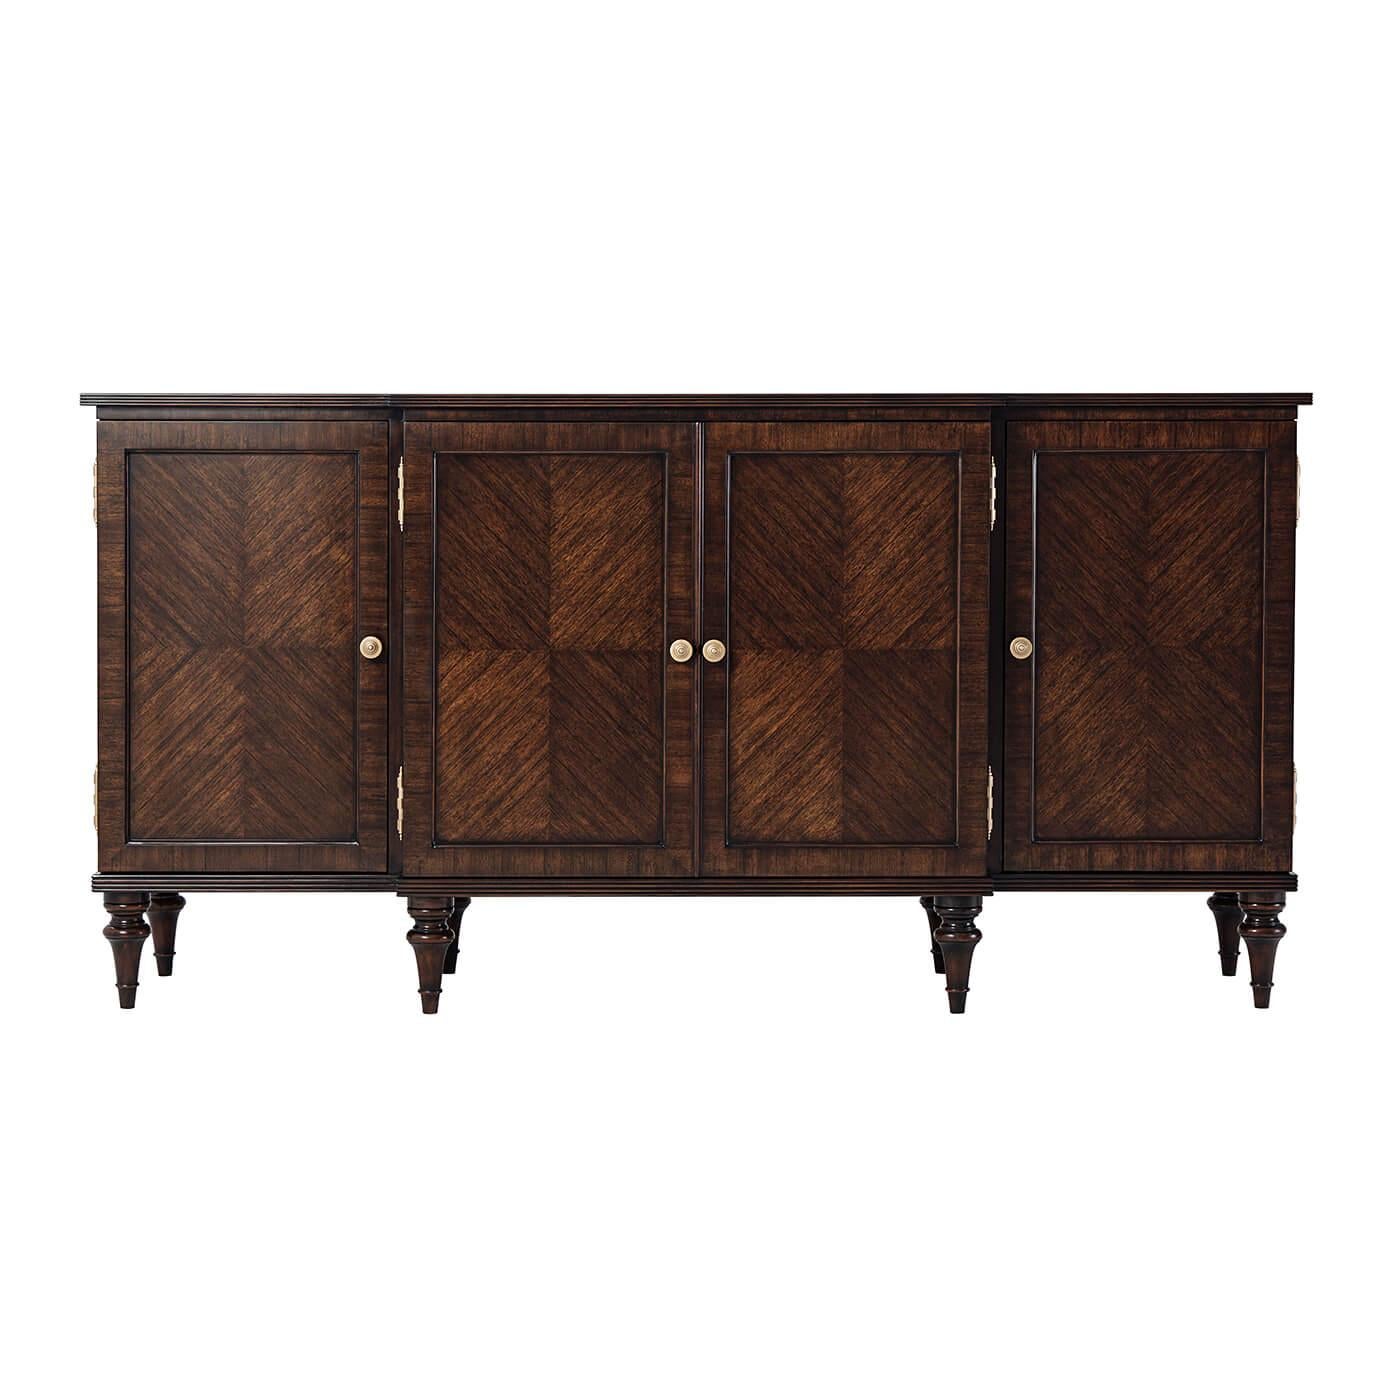 English Regency style breakfront credenza with feathered Paldoa veneers, a breakfront with a reeded edge top, with four recessed panel doors enclosing shelves and two drawers, with a reeded frame base and raised on turned and tapered